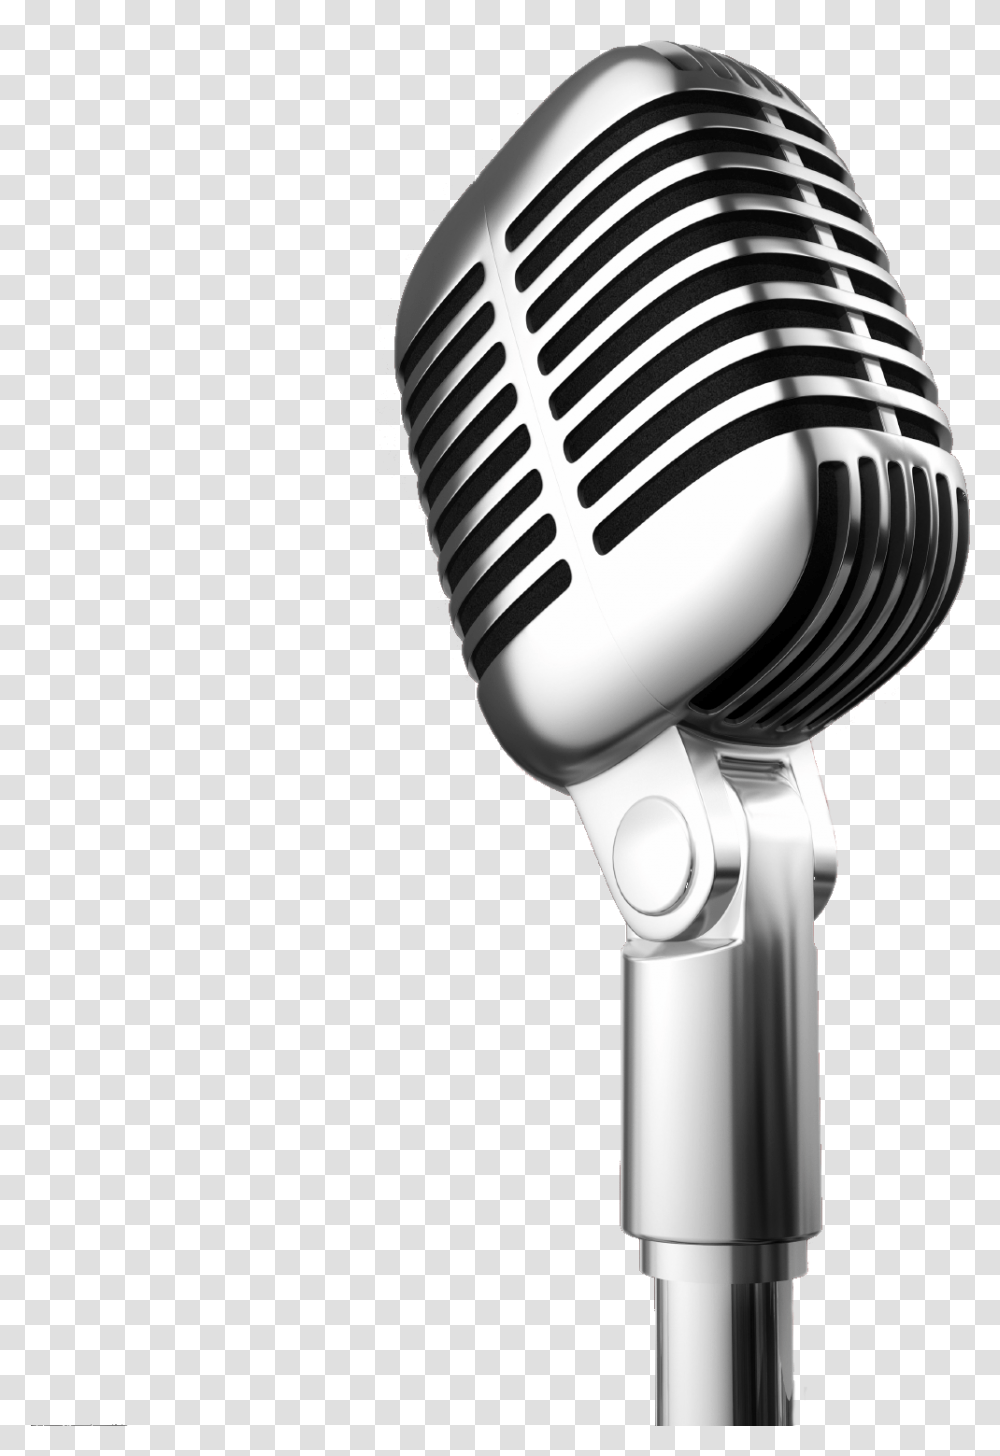 Microphone News Book Human Voice Background Microphone, Electrical Device, Blow Dryer, Appliance, Hair Drier Transparent Png